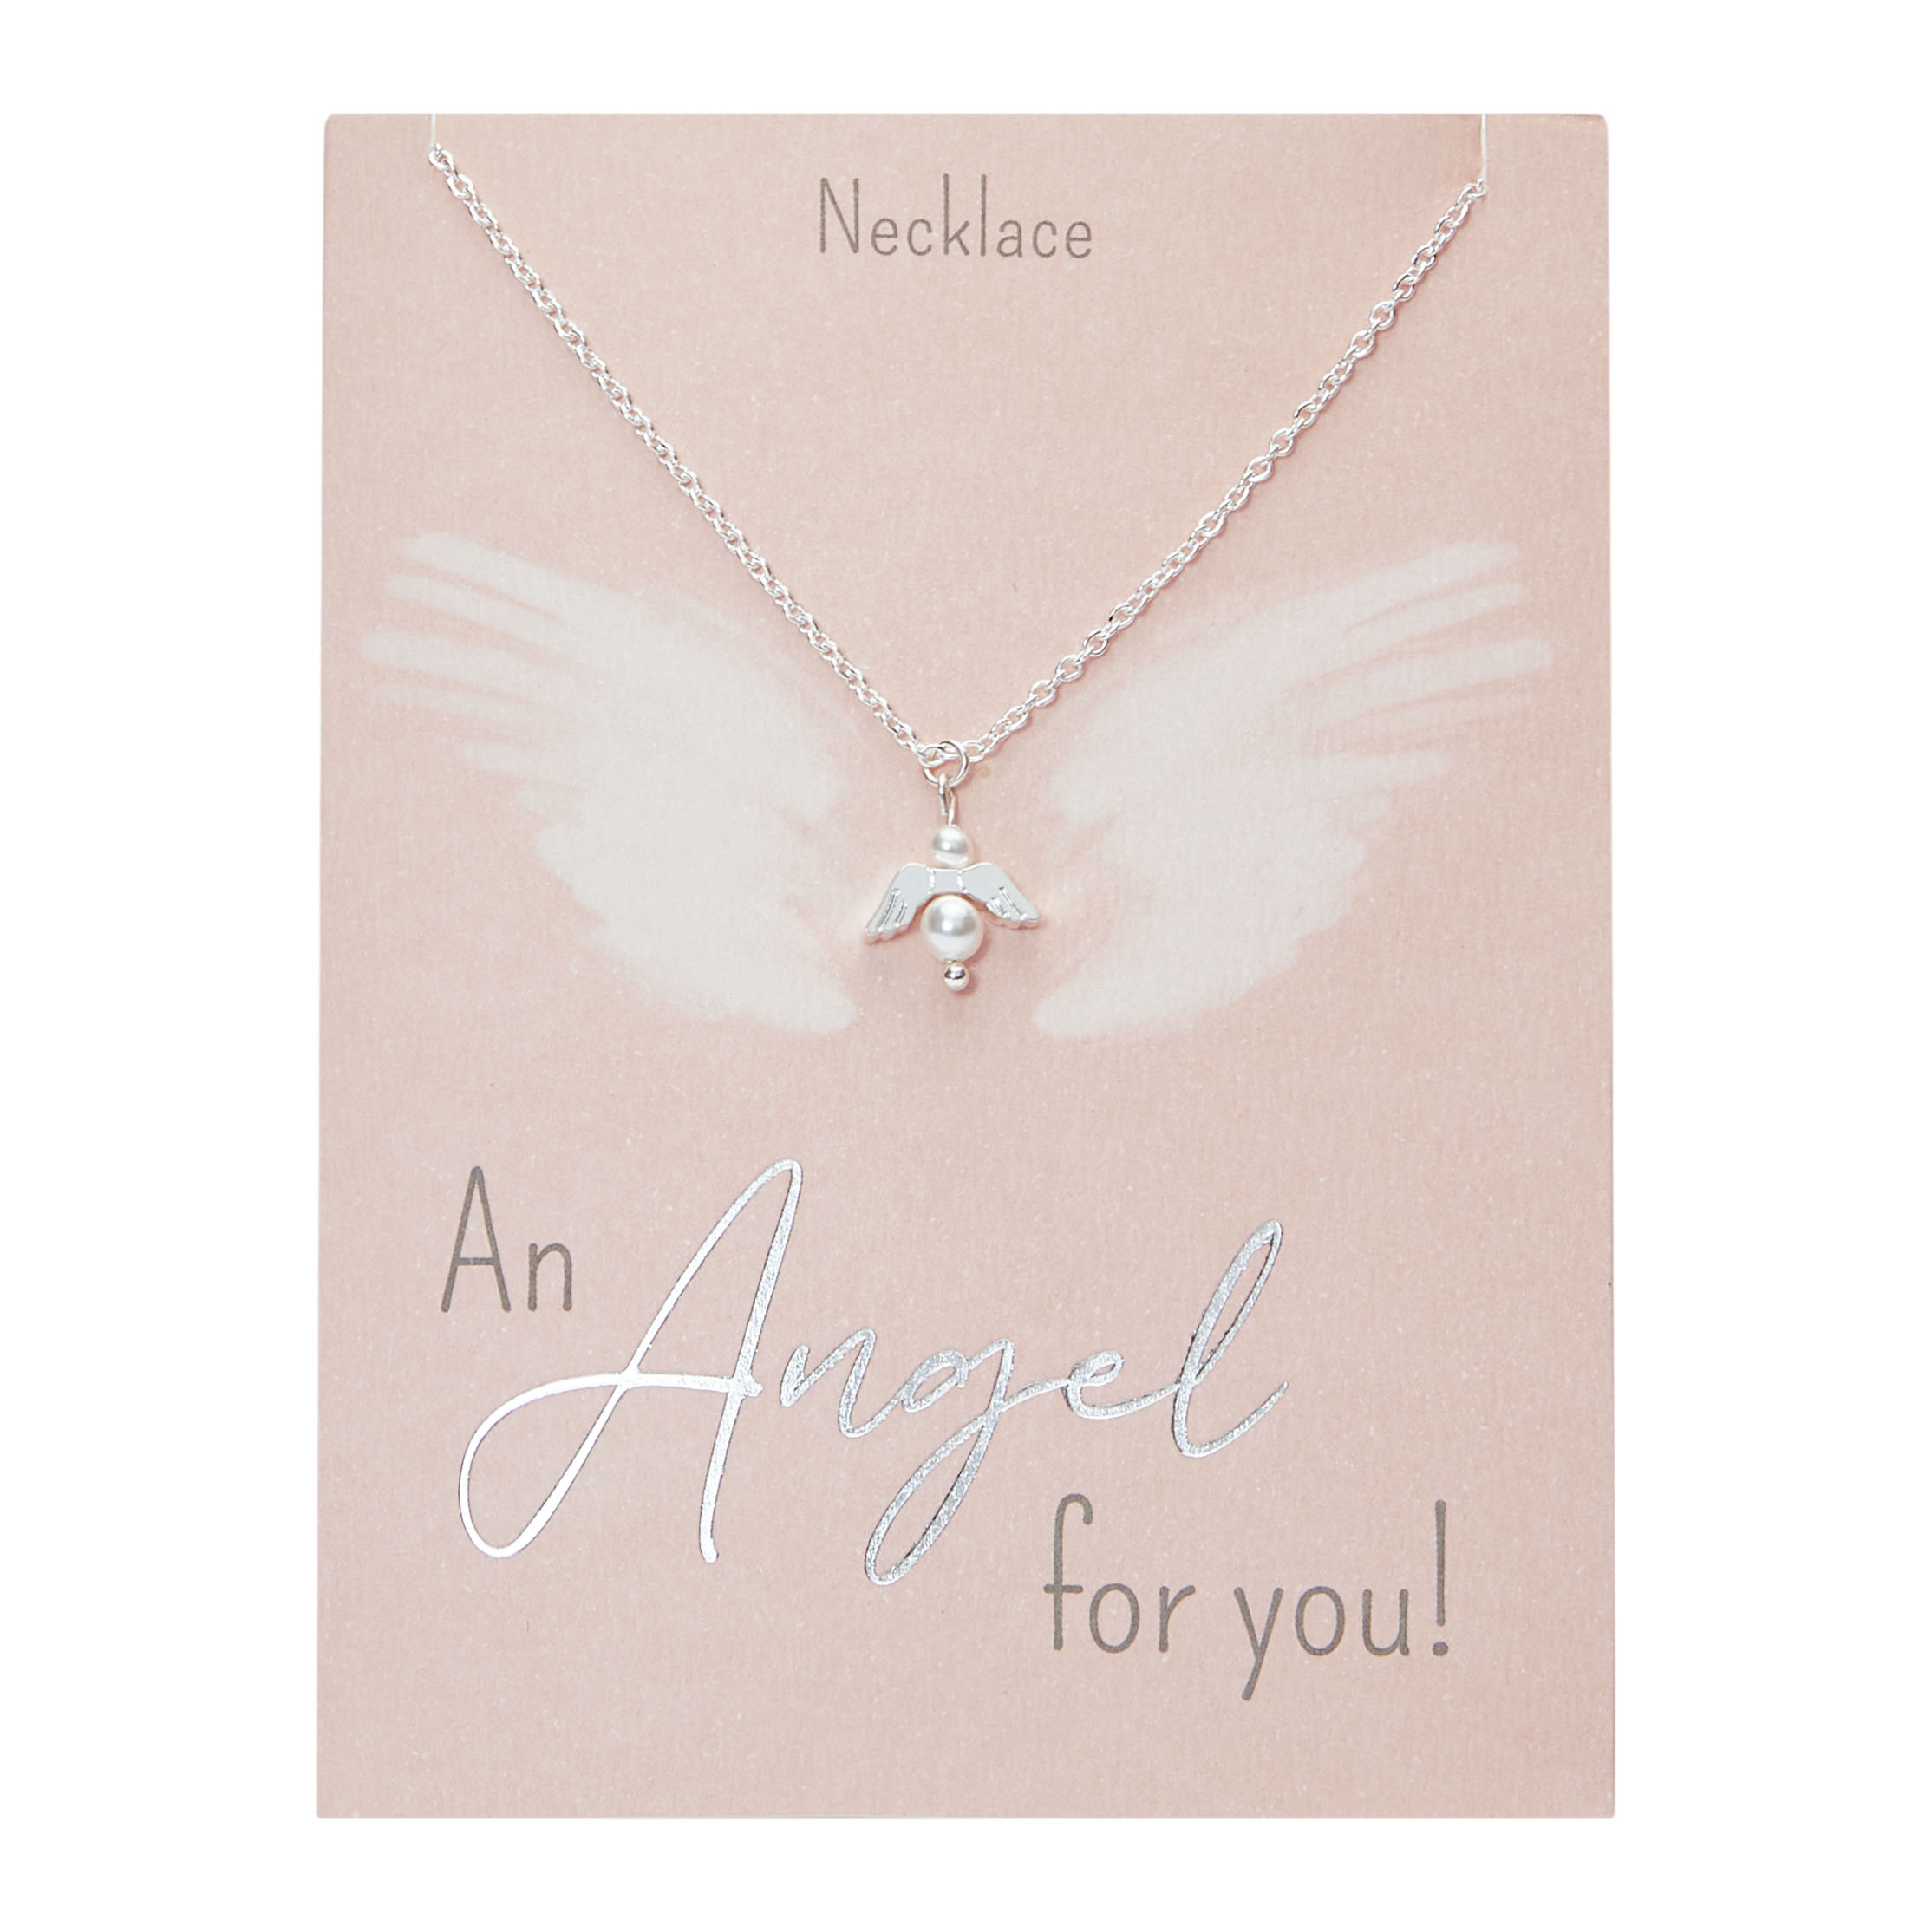 Display necklaces "An Angel for you" 